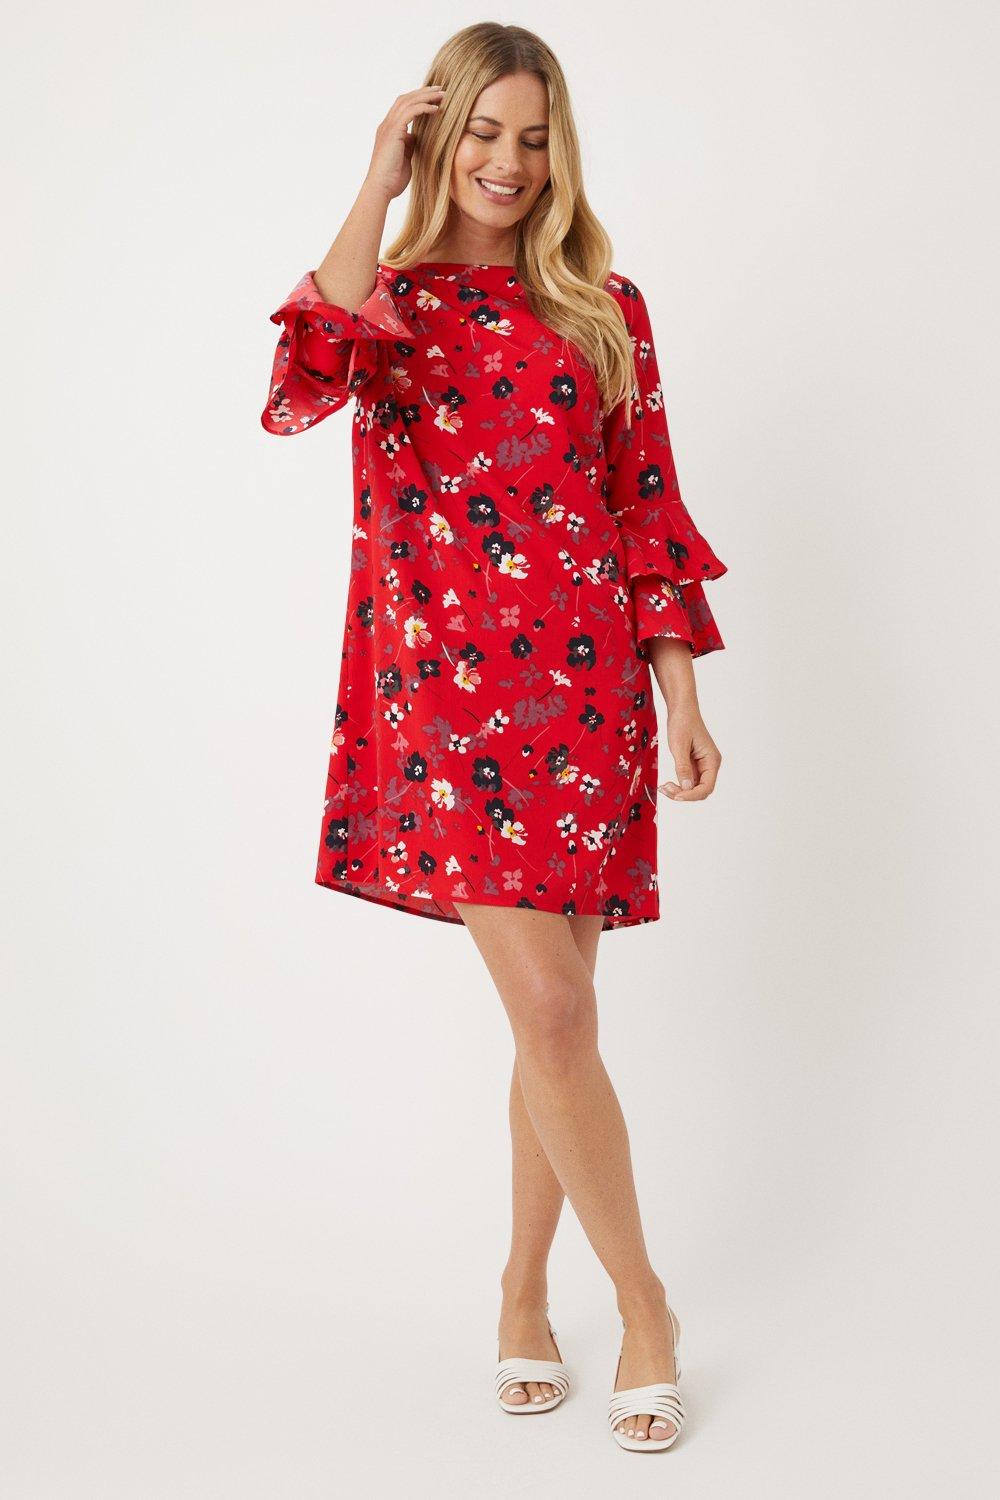 Womens Petite Red Floral Shift Dress